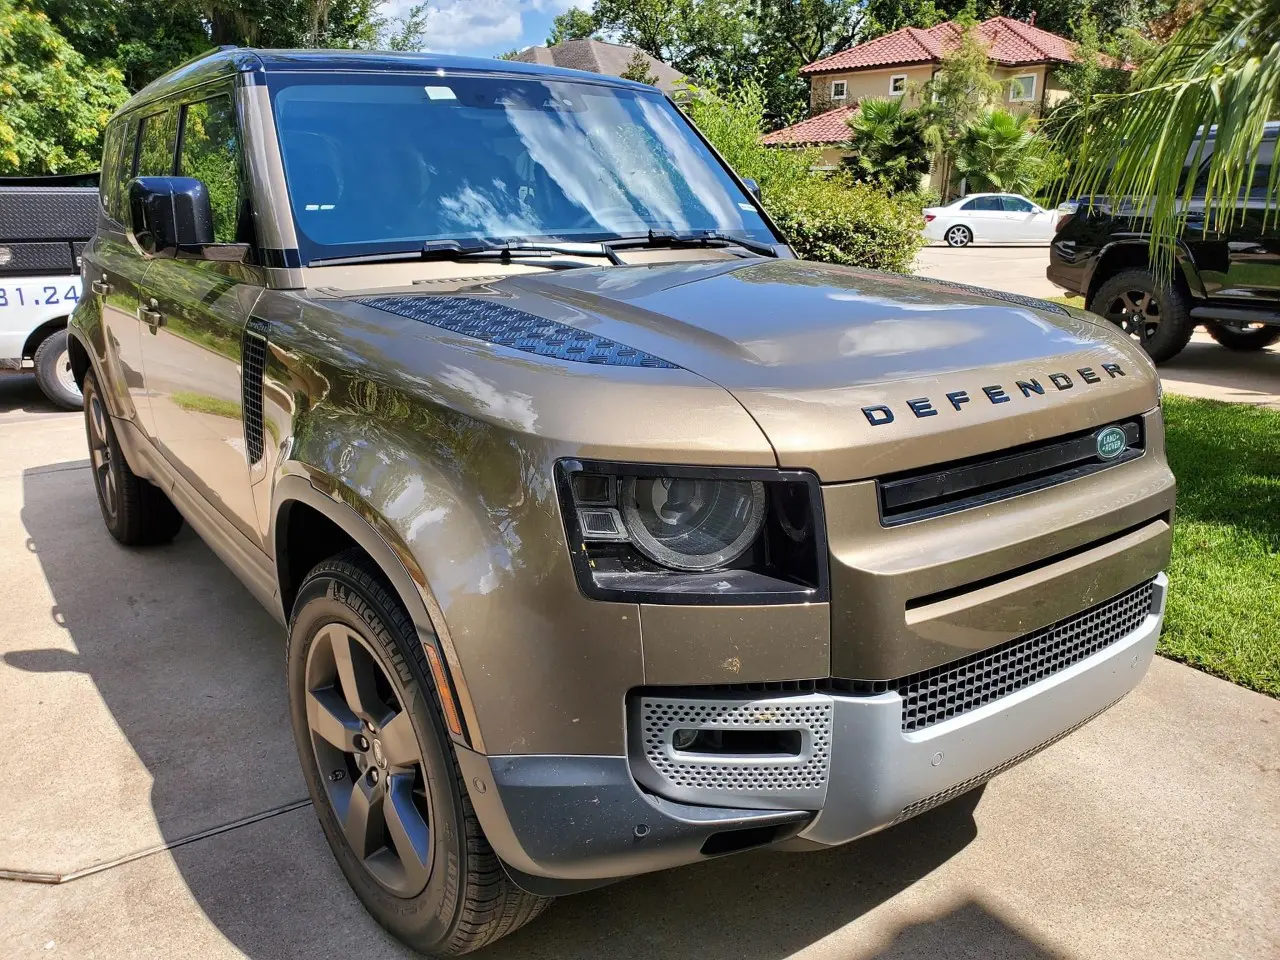 A tan land rover parked in the driveway.